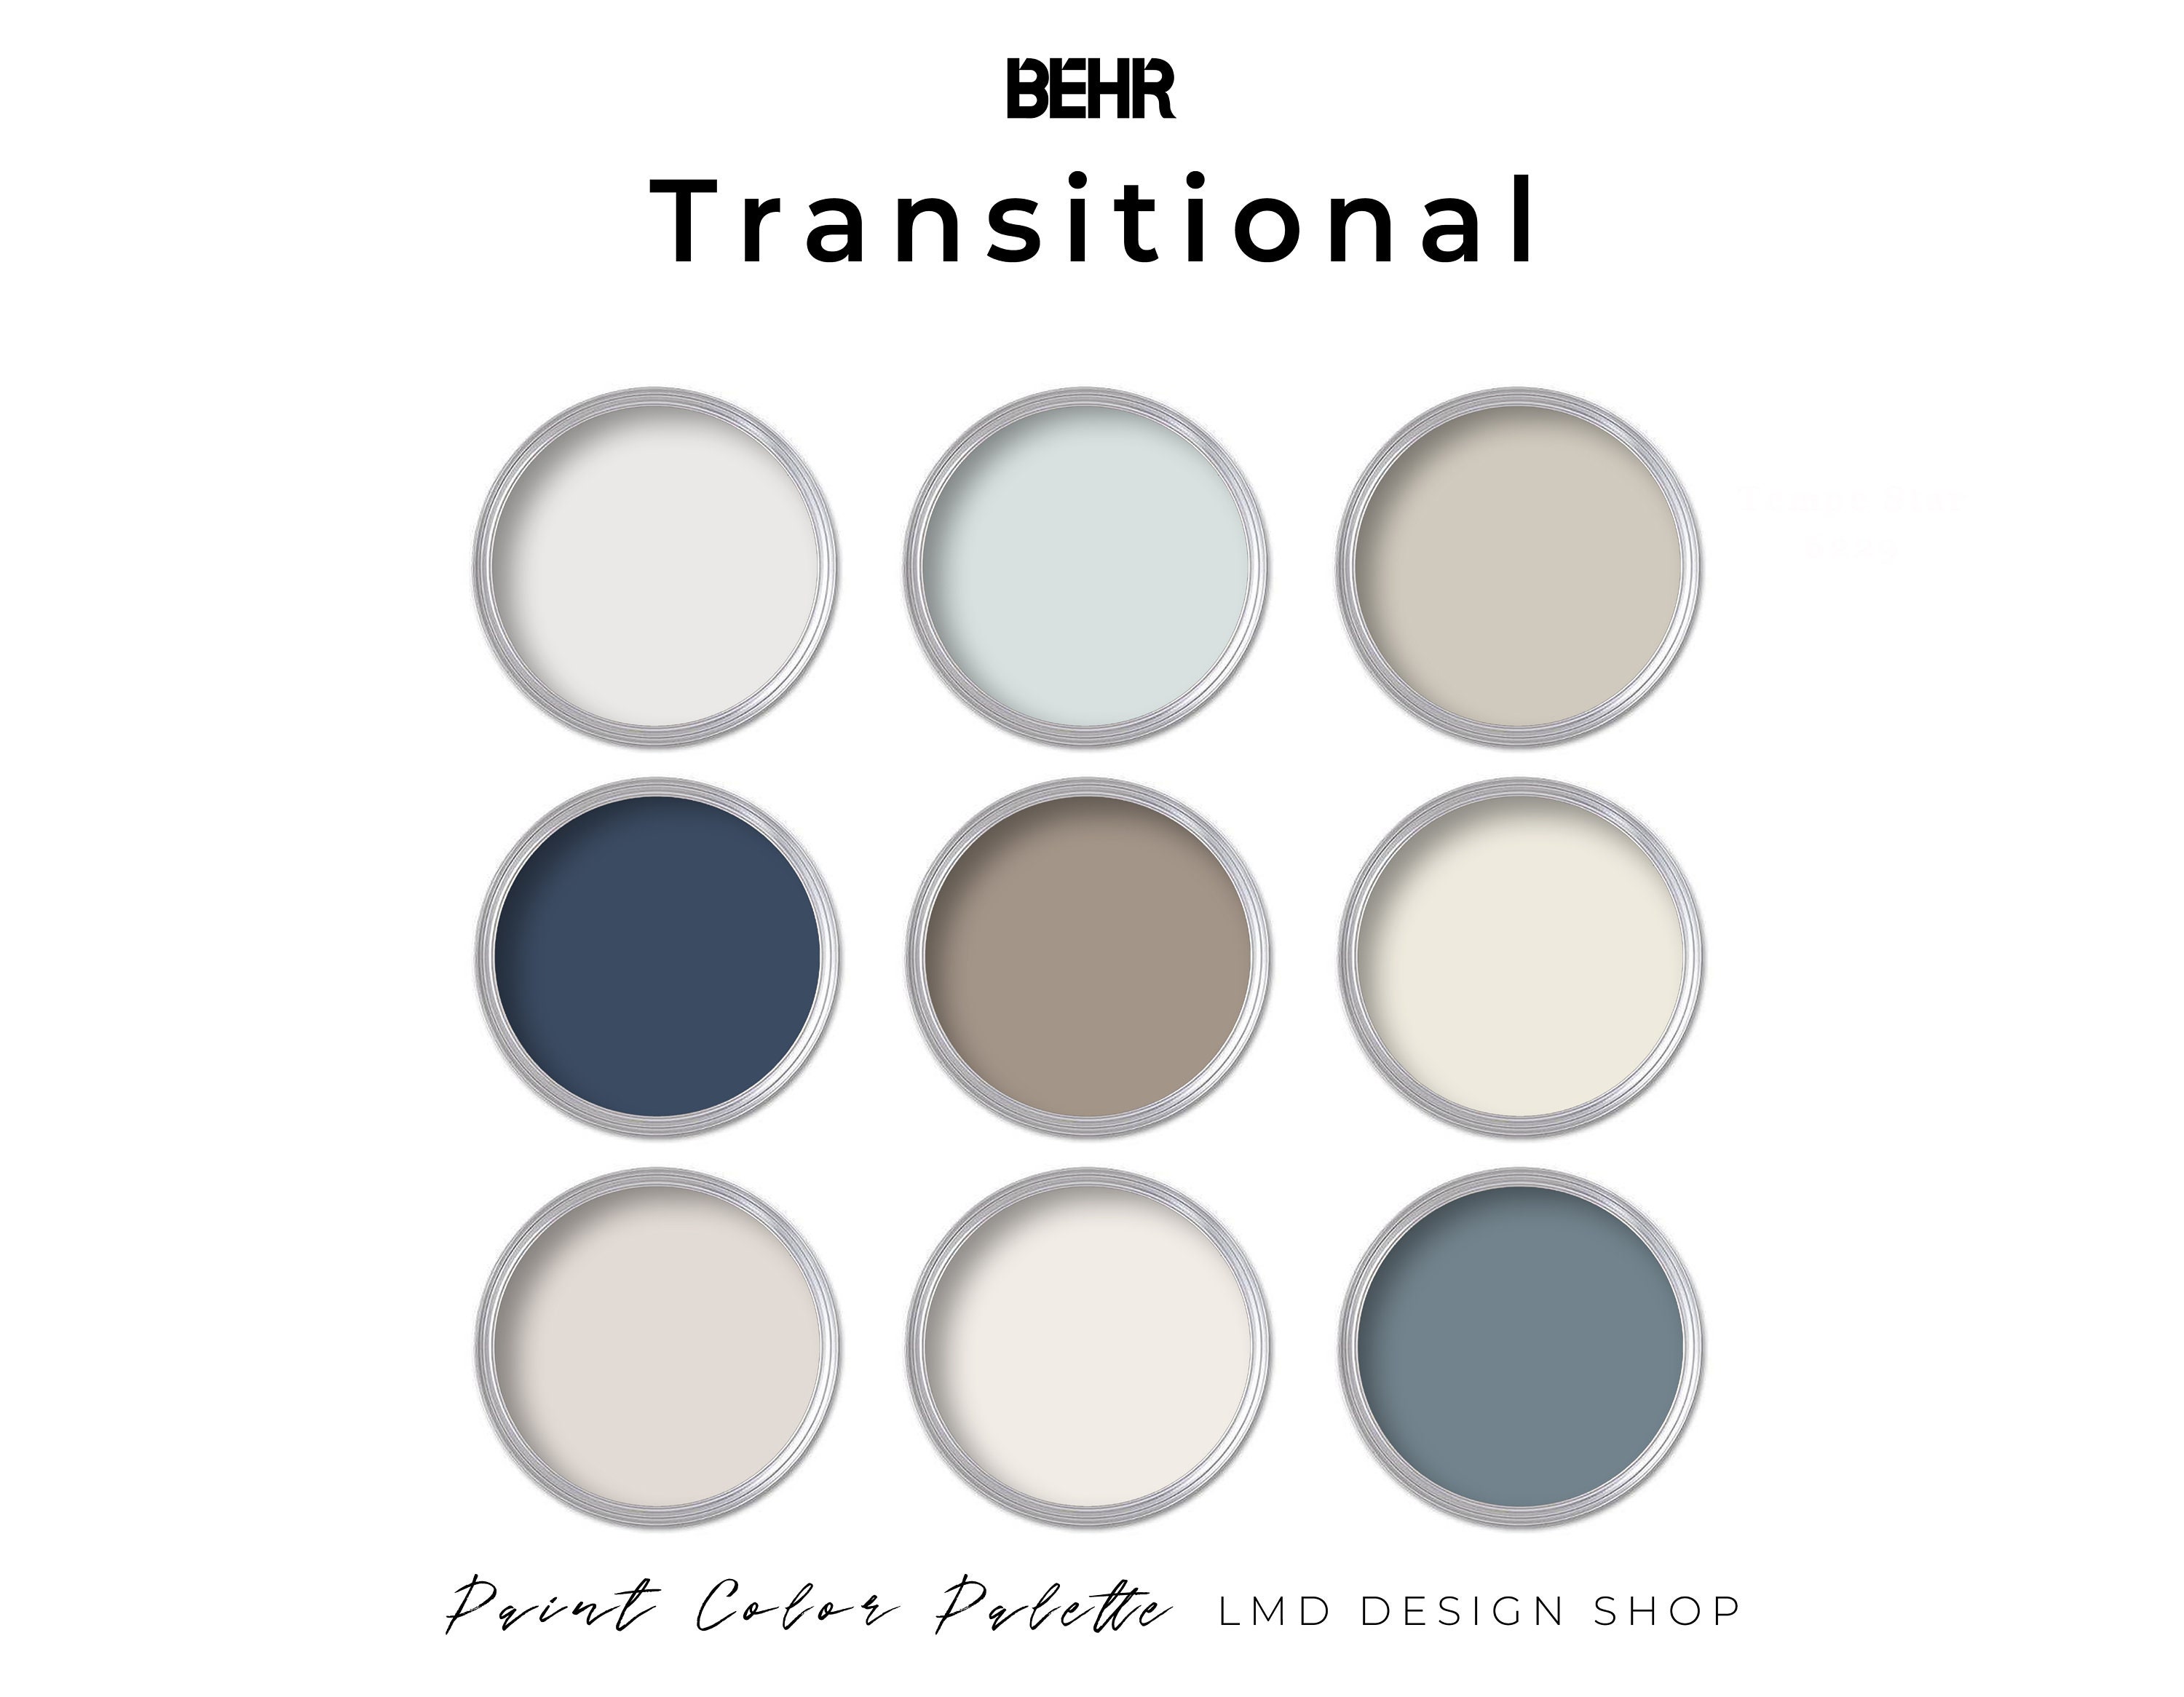 Behr Will Transform a Room You Want Painted Into a Mini Diorama